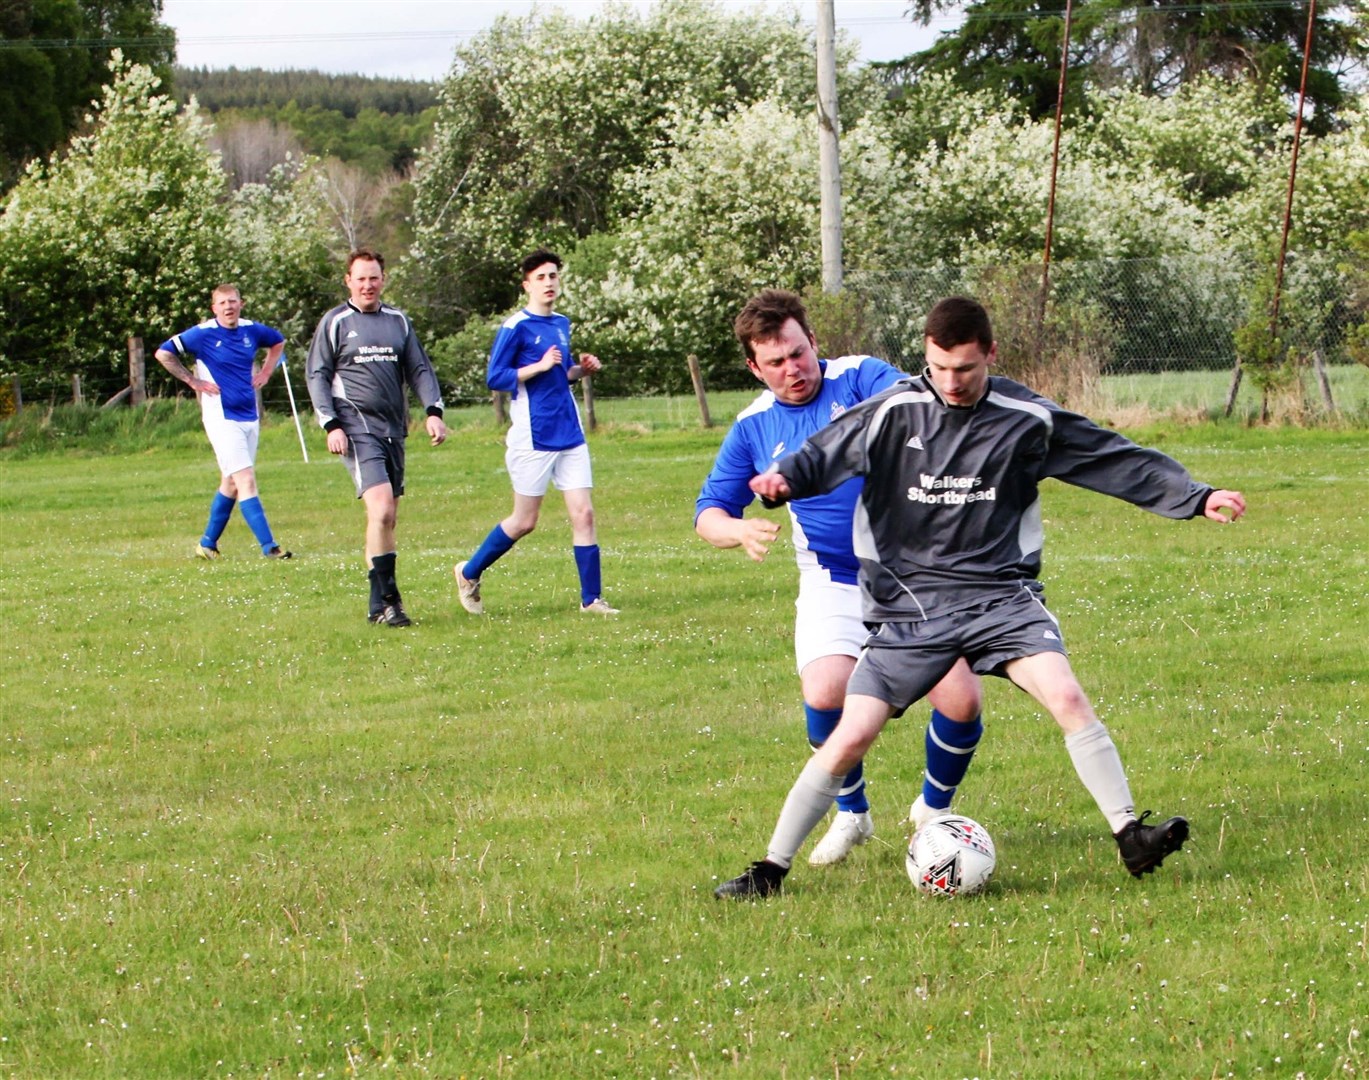 Rover’s Cameron Falconer goes in for a challenge on Abernethy’s Matt McHendry.